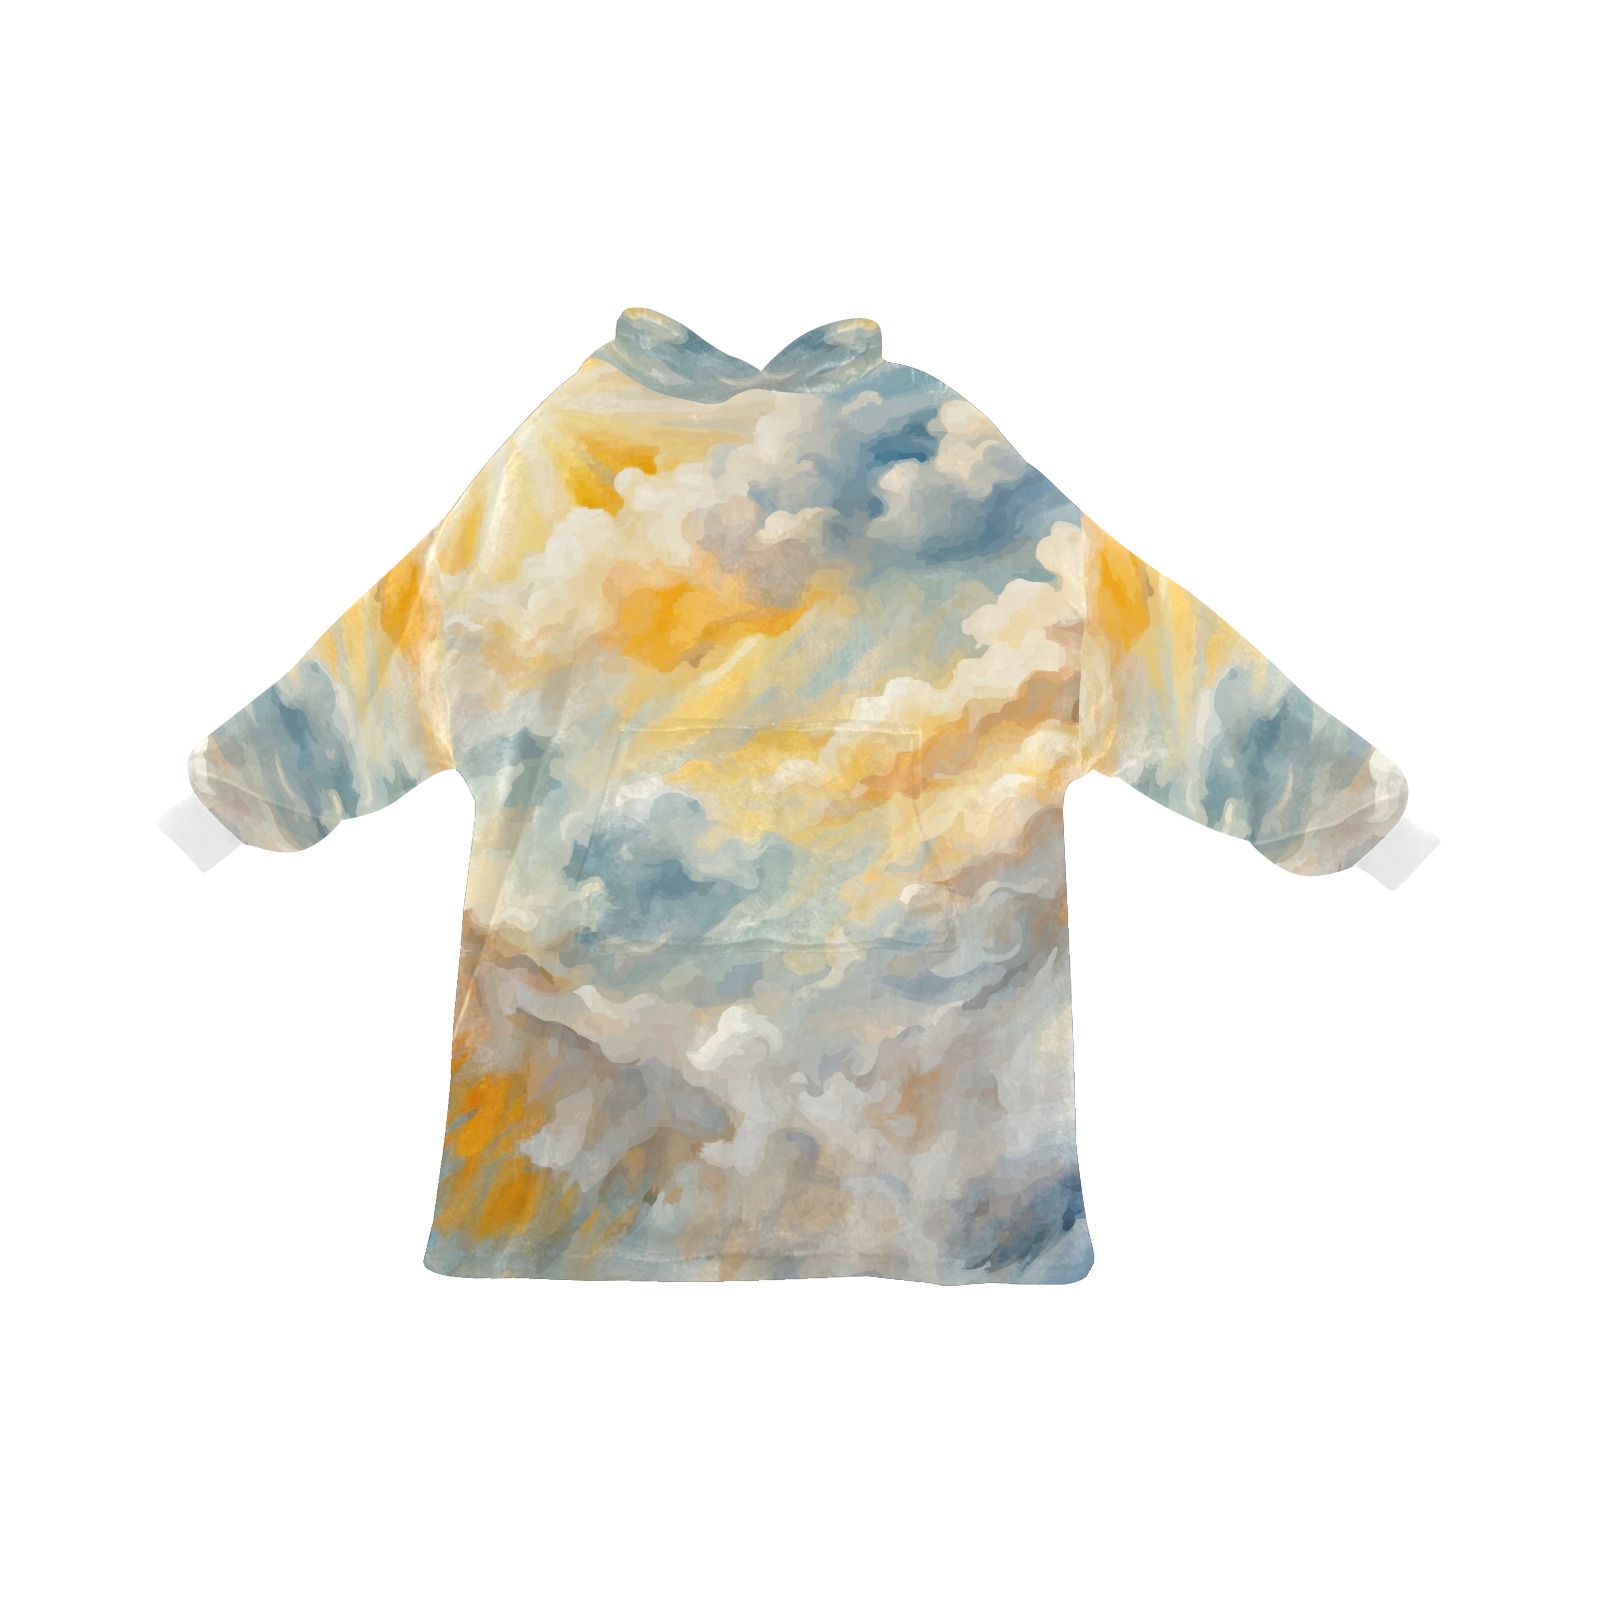 Sun is shining above the colorful clouds cool art Blanket Hoodie for Men